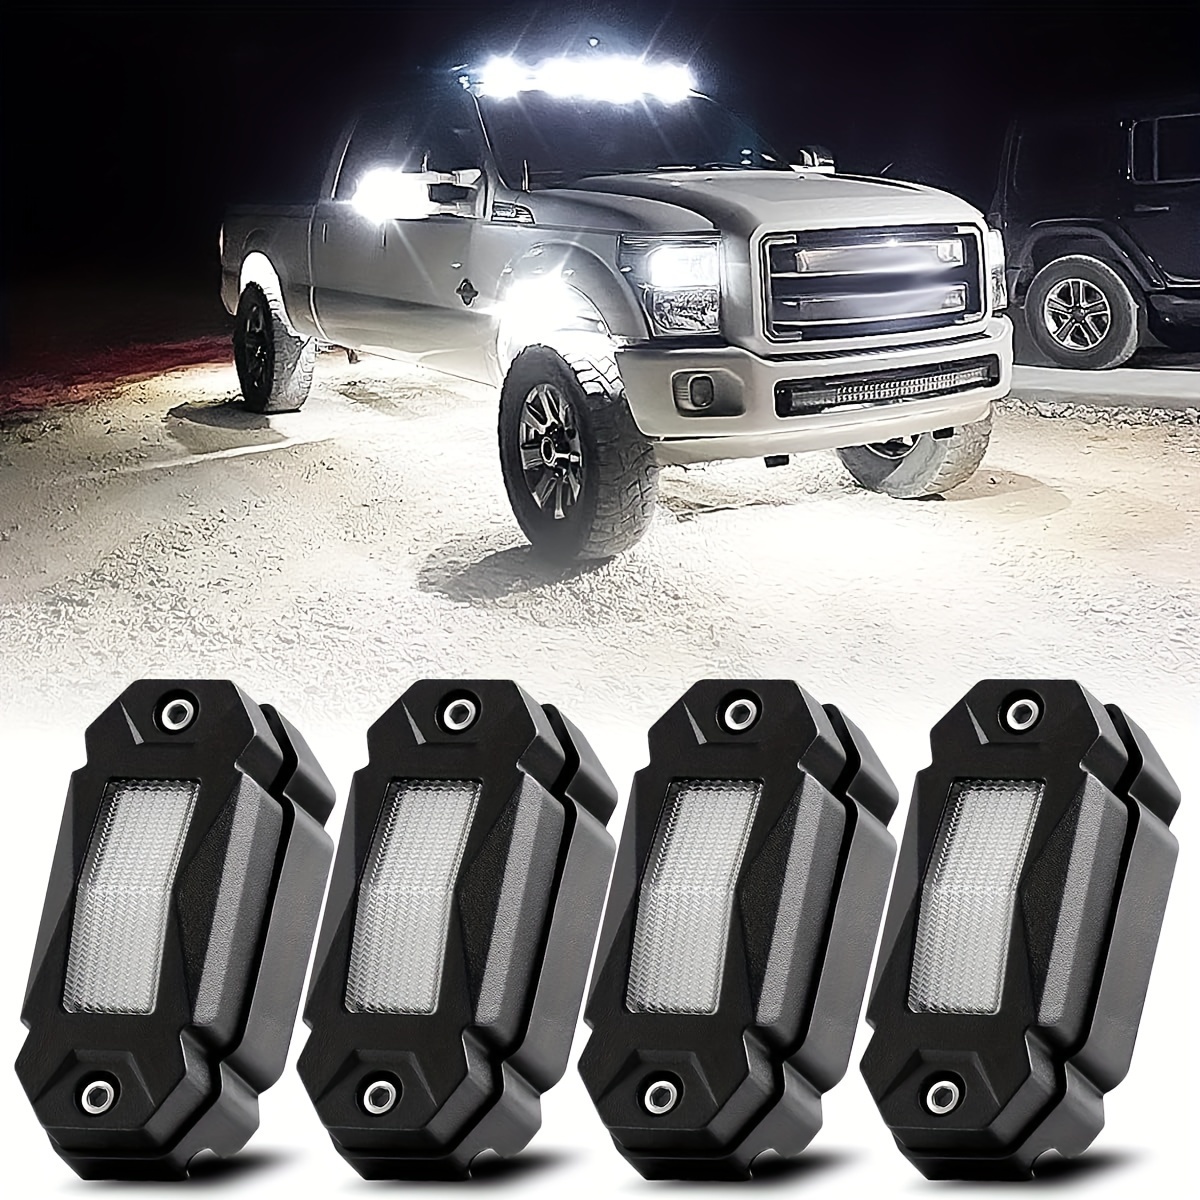 

Lights 4pcs High Power Underbody Pure White Led Rock Lights For Jeep Off Road Trucks Rzr Boat Atv Underglow Trail Trai Rig Light Waterproof